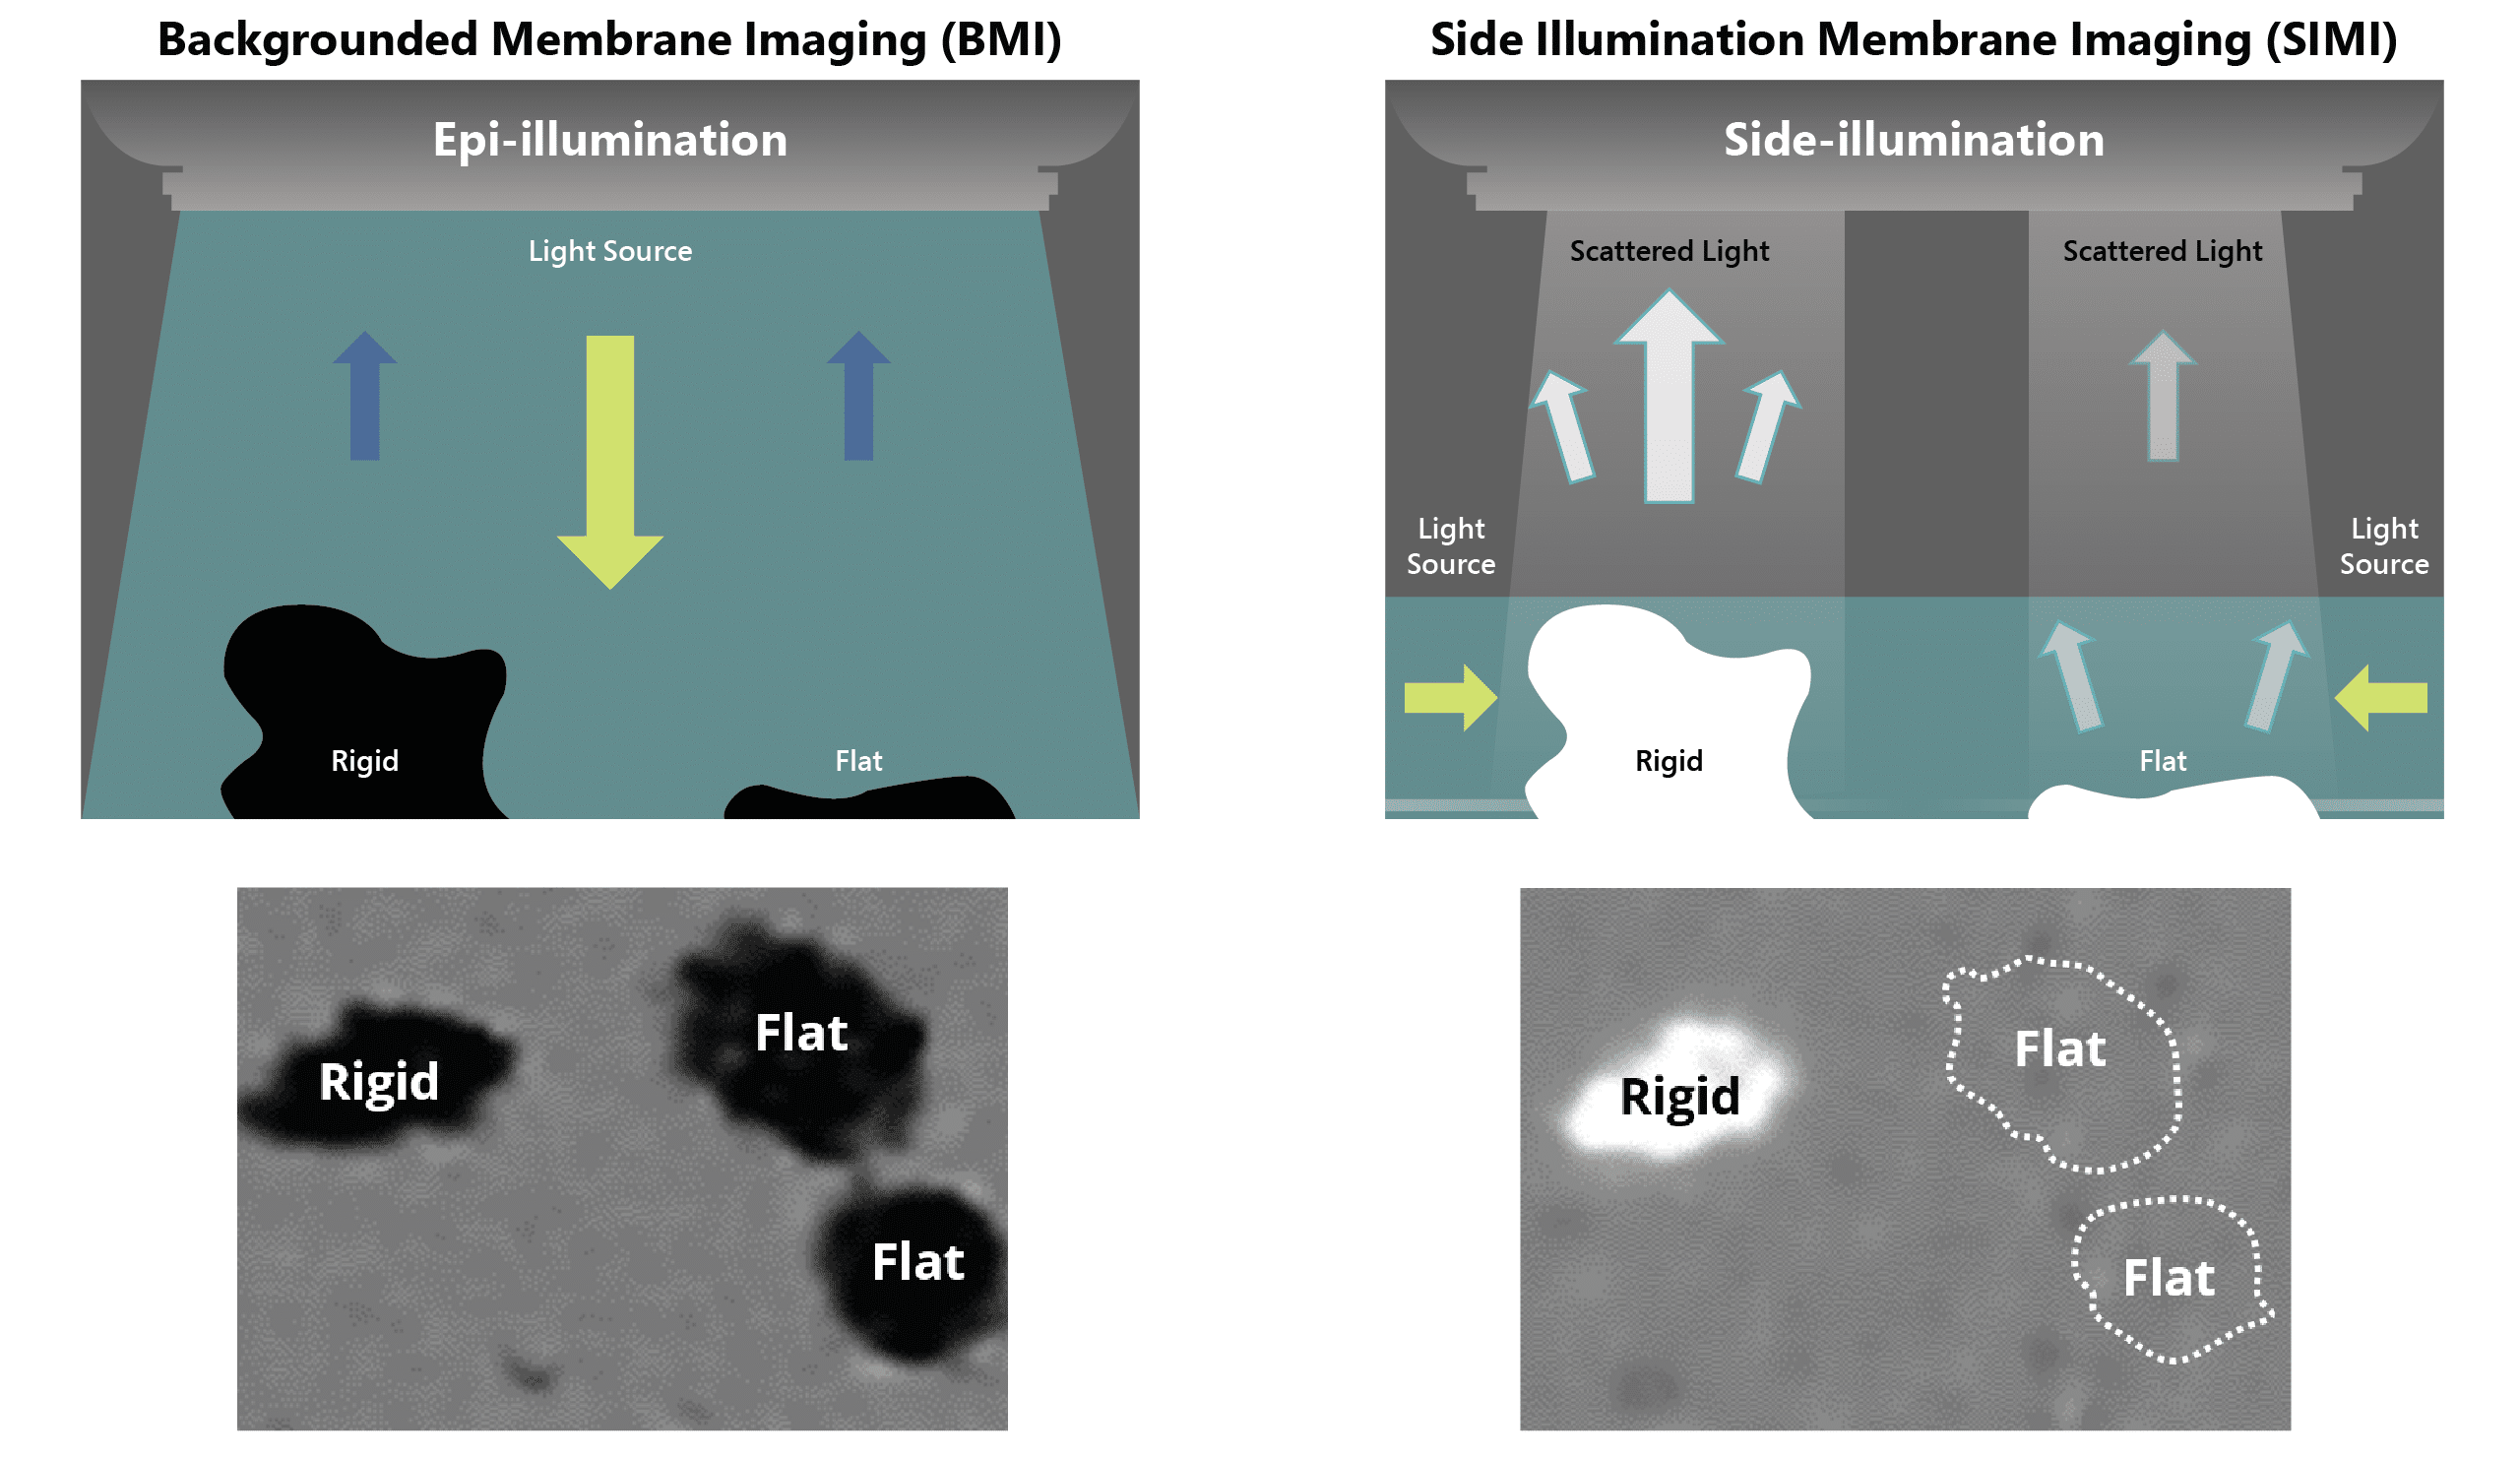 Biological aggregates are mechanically compliant and lay flat on the surface of the membrane (left), whereas extrinsic contaminants protrude, providing greater SIMI signature (right). 